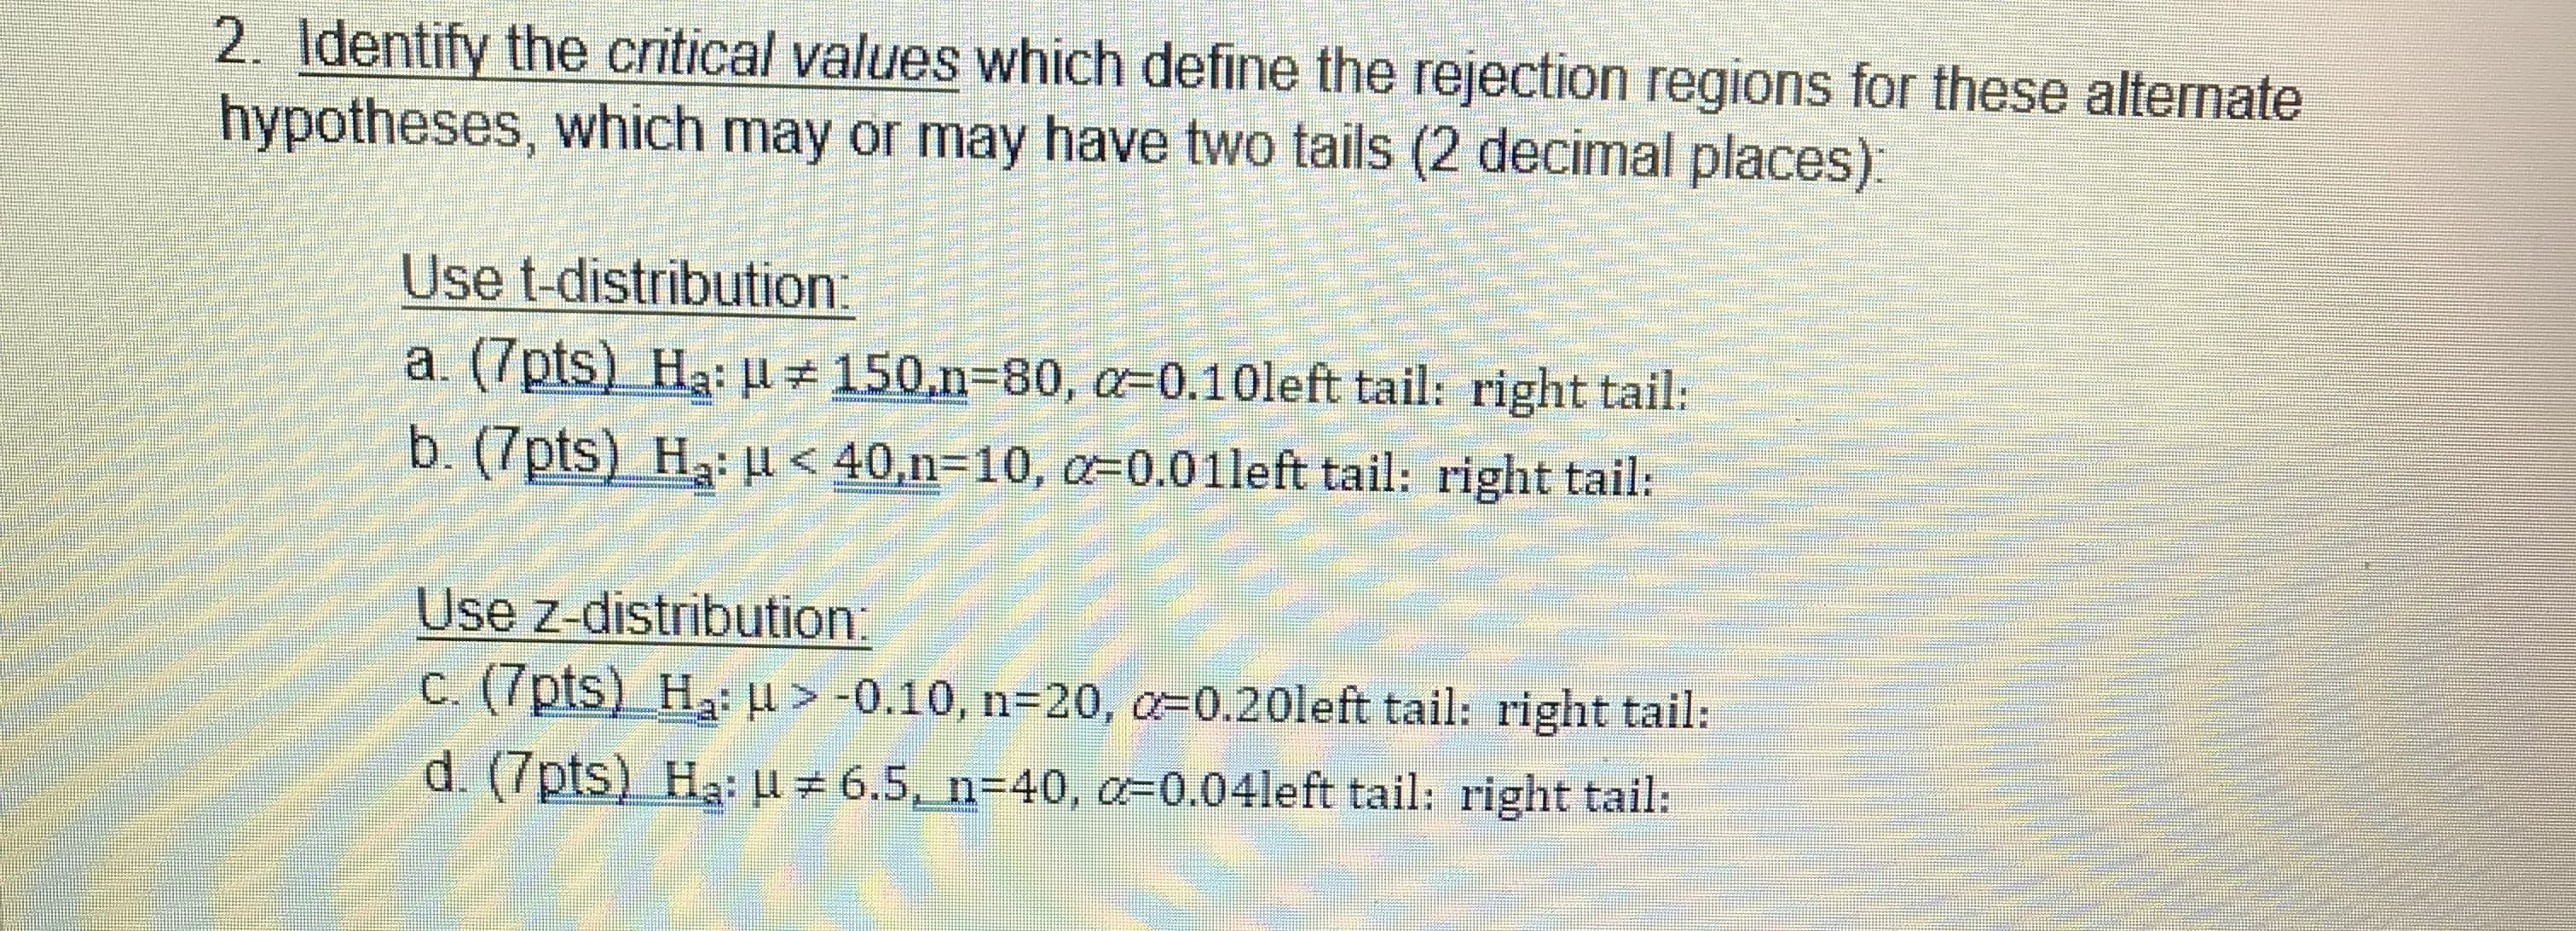 2. Identify the critical values which define the rejection regions for these alternate
hypotheses, which may or may have two tails (2 decimal places).
